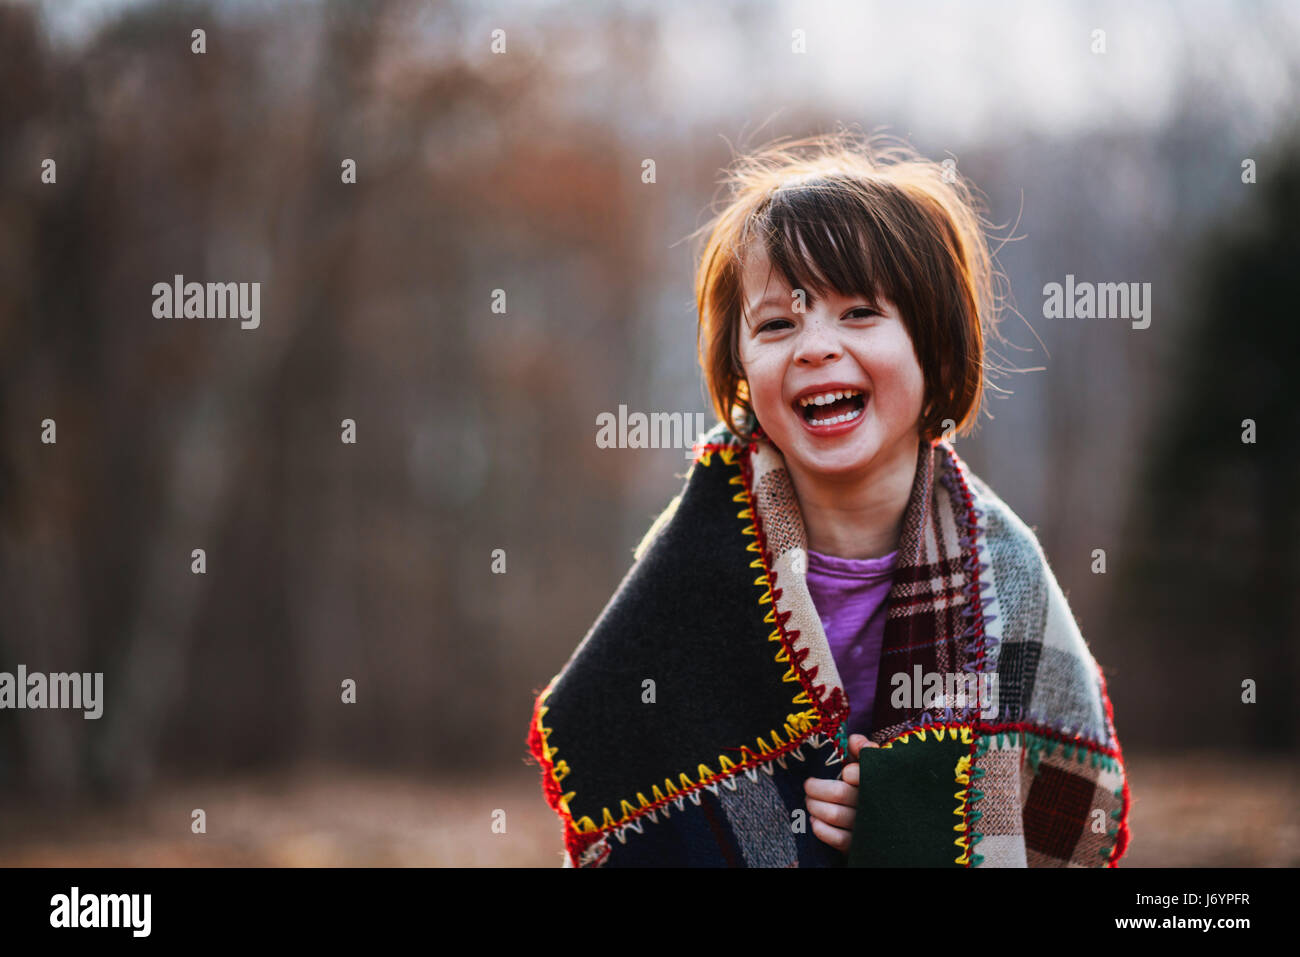 Portrait of a girl wrapped in a blanket laughing Stock Photo